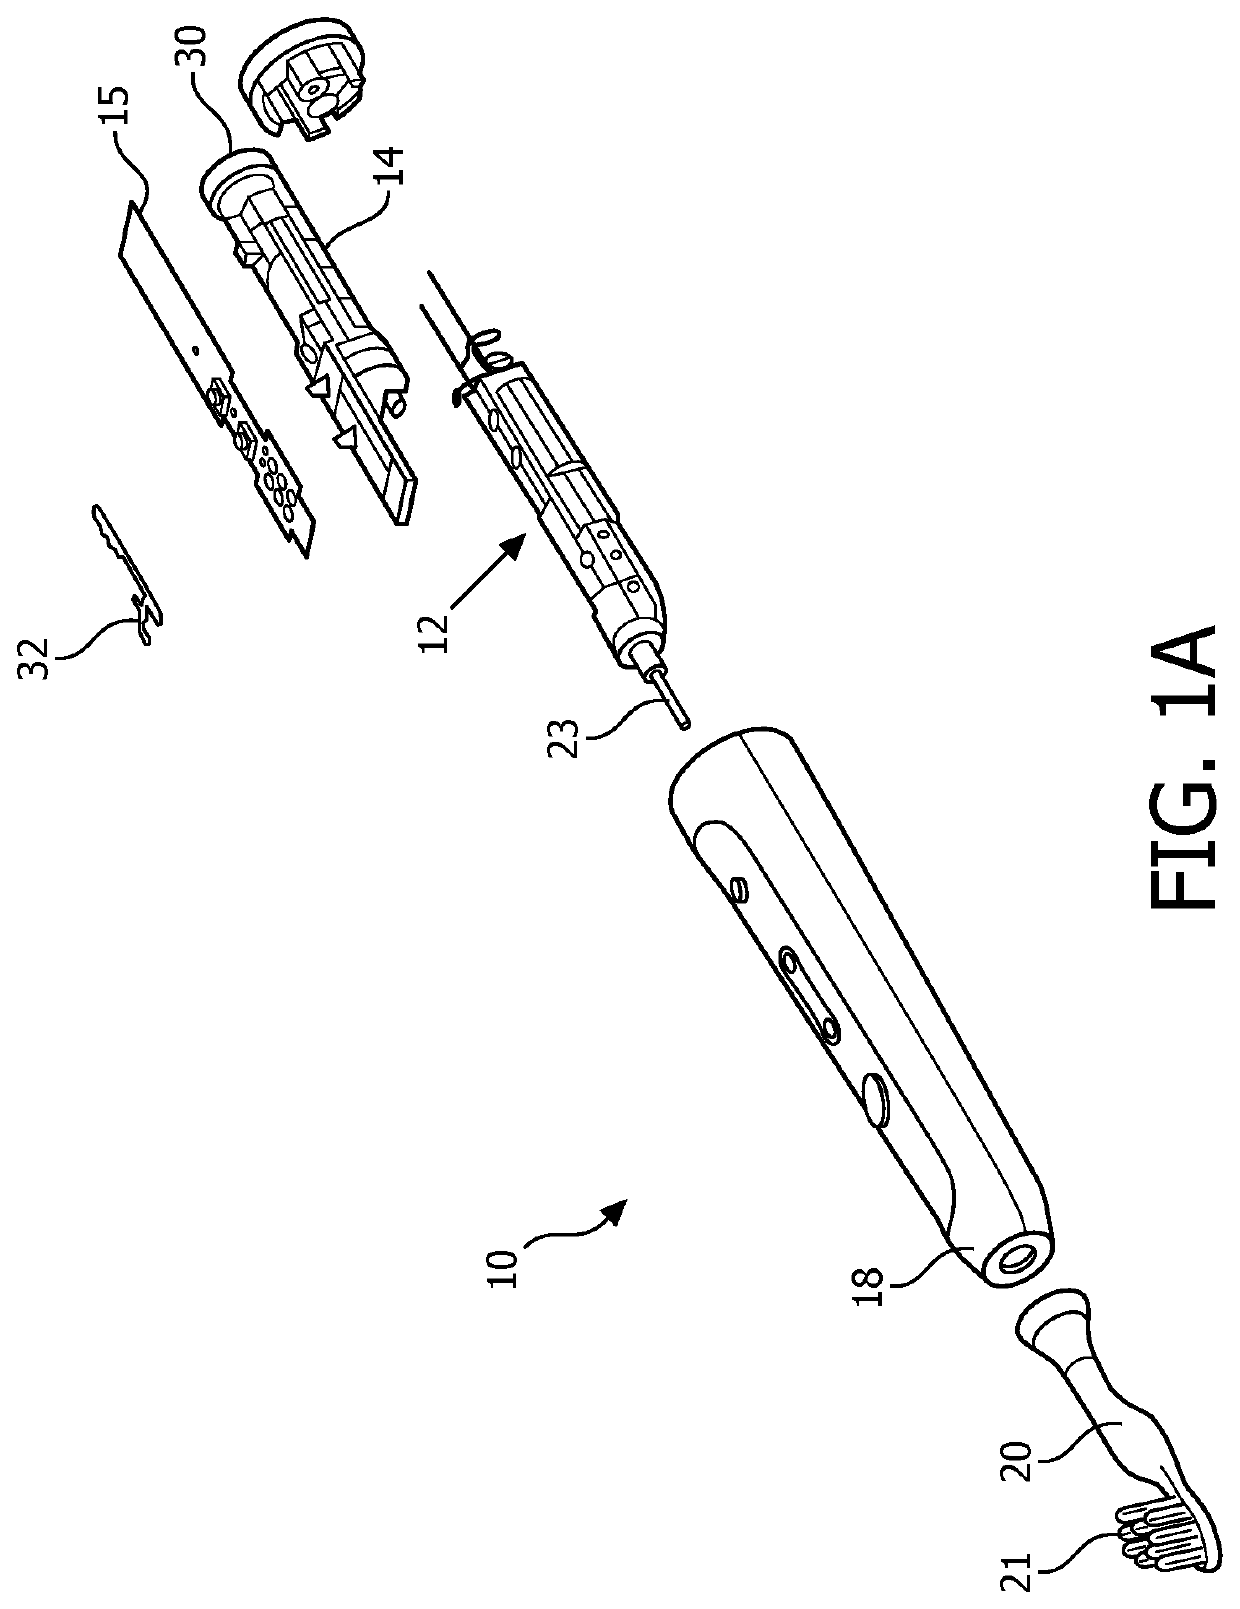 Methods and systems for extracting brushing motion characteristics of a user using an oral hygiene device including at least one accelerometer to provide feedback to a user